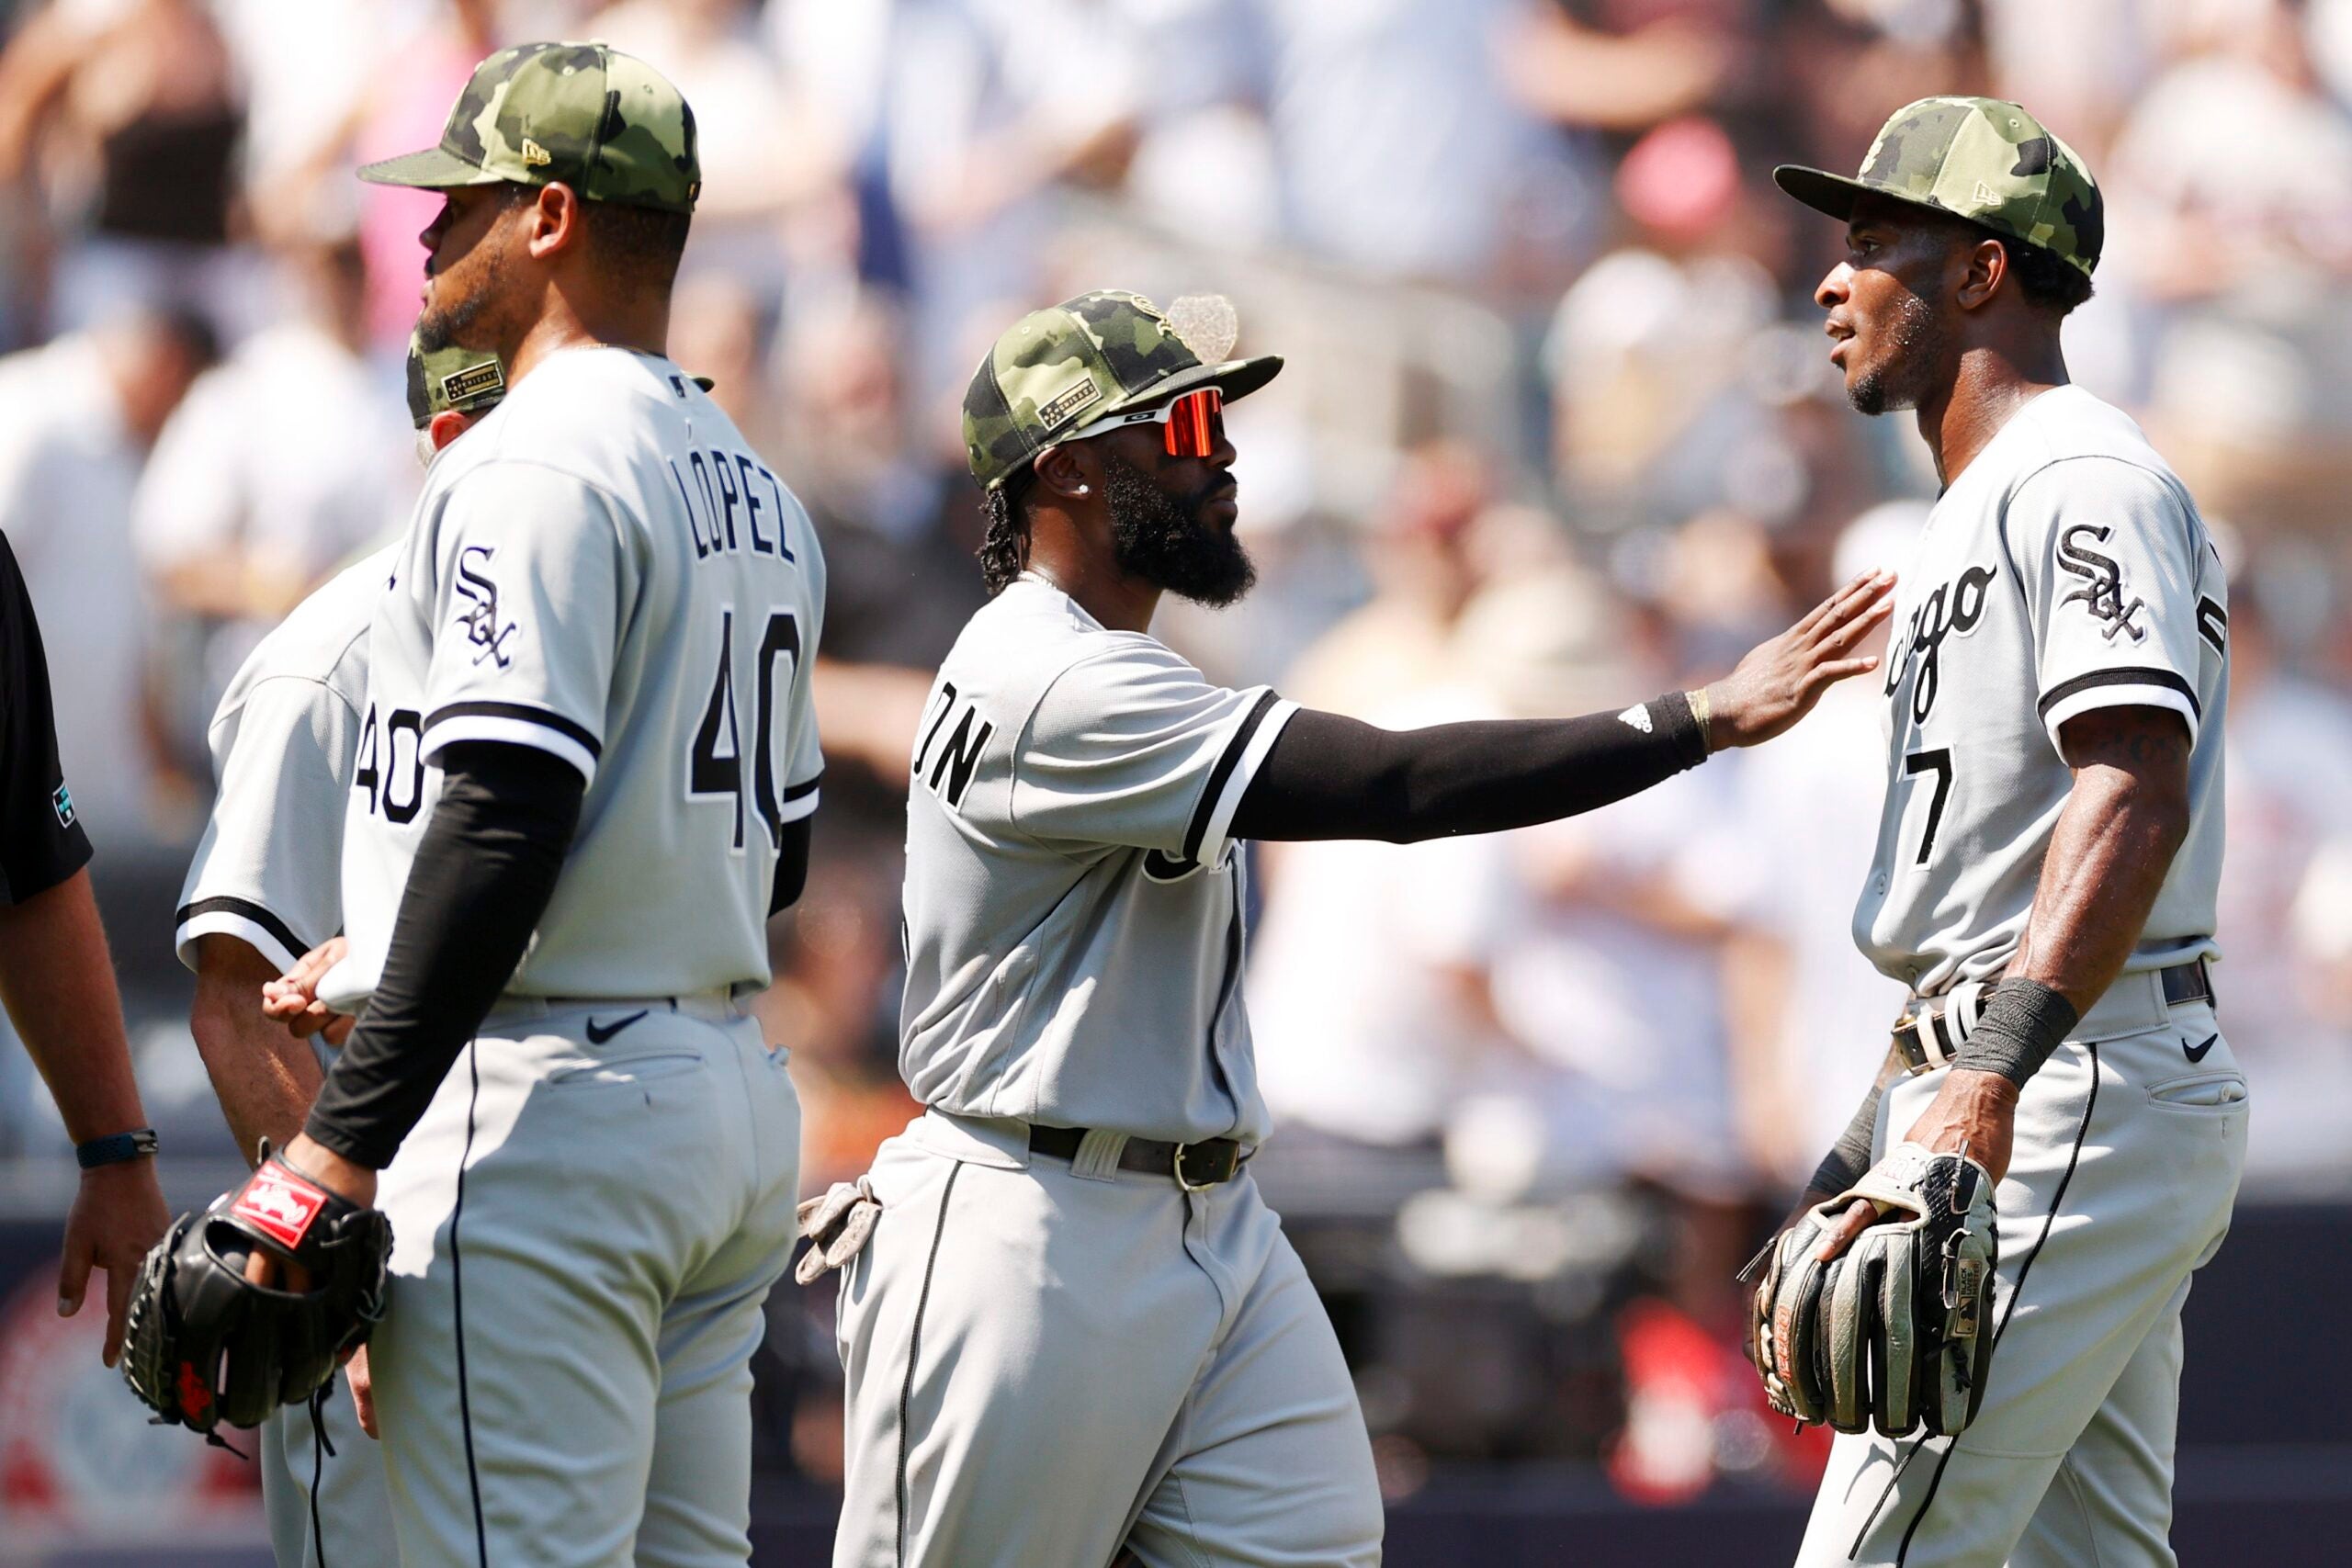 White Sox shortstop Tim Anderson makes special tribute for Players Weekend